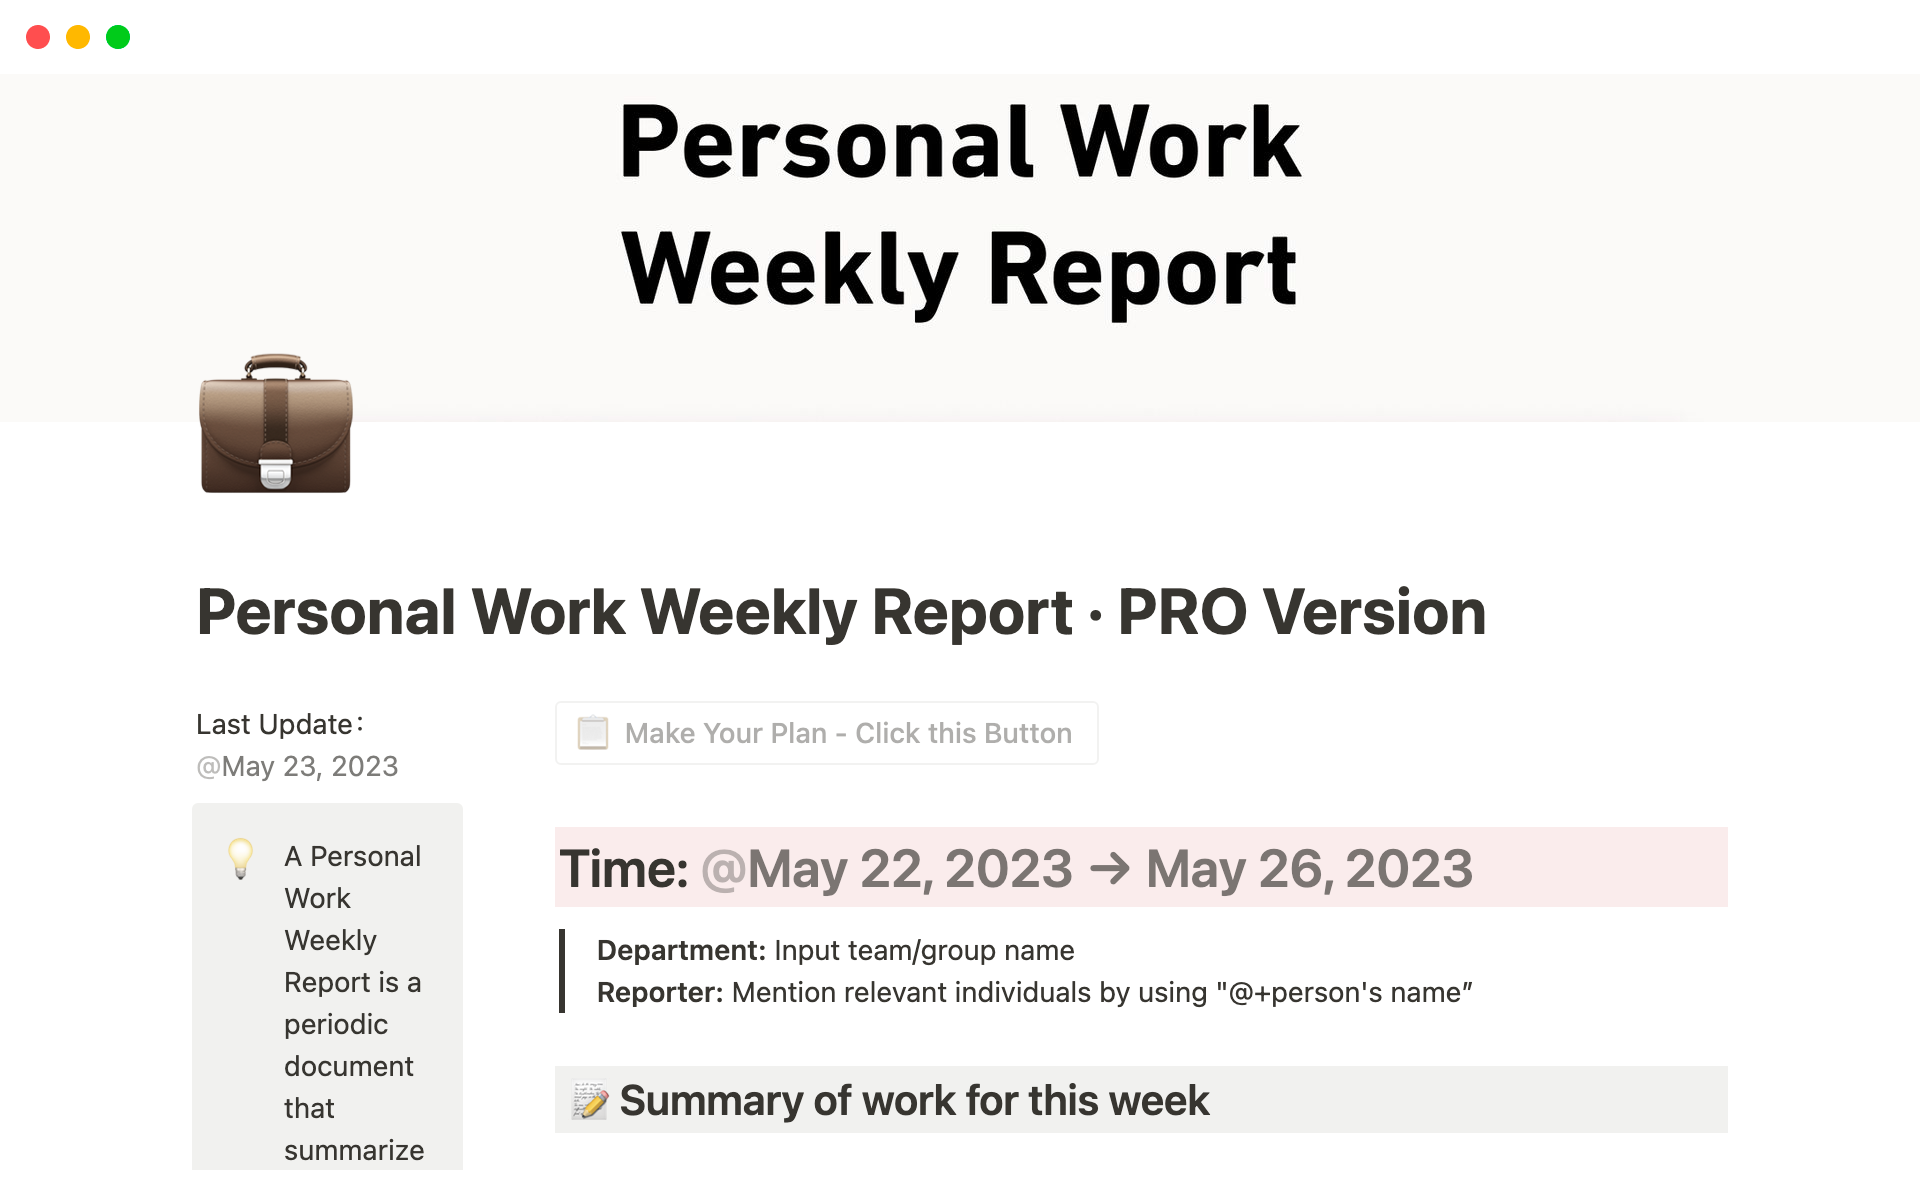 A Personal Work Weekly Report is a periodic document that summarizes an individual's work progress and achievements during the past week.